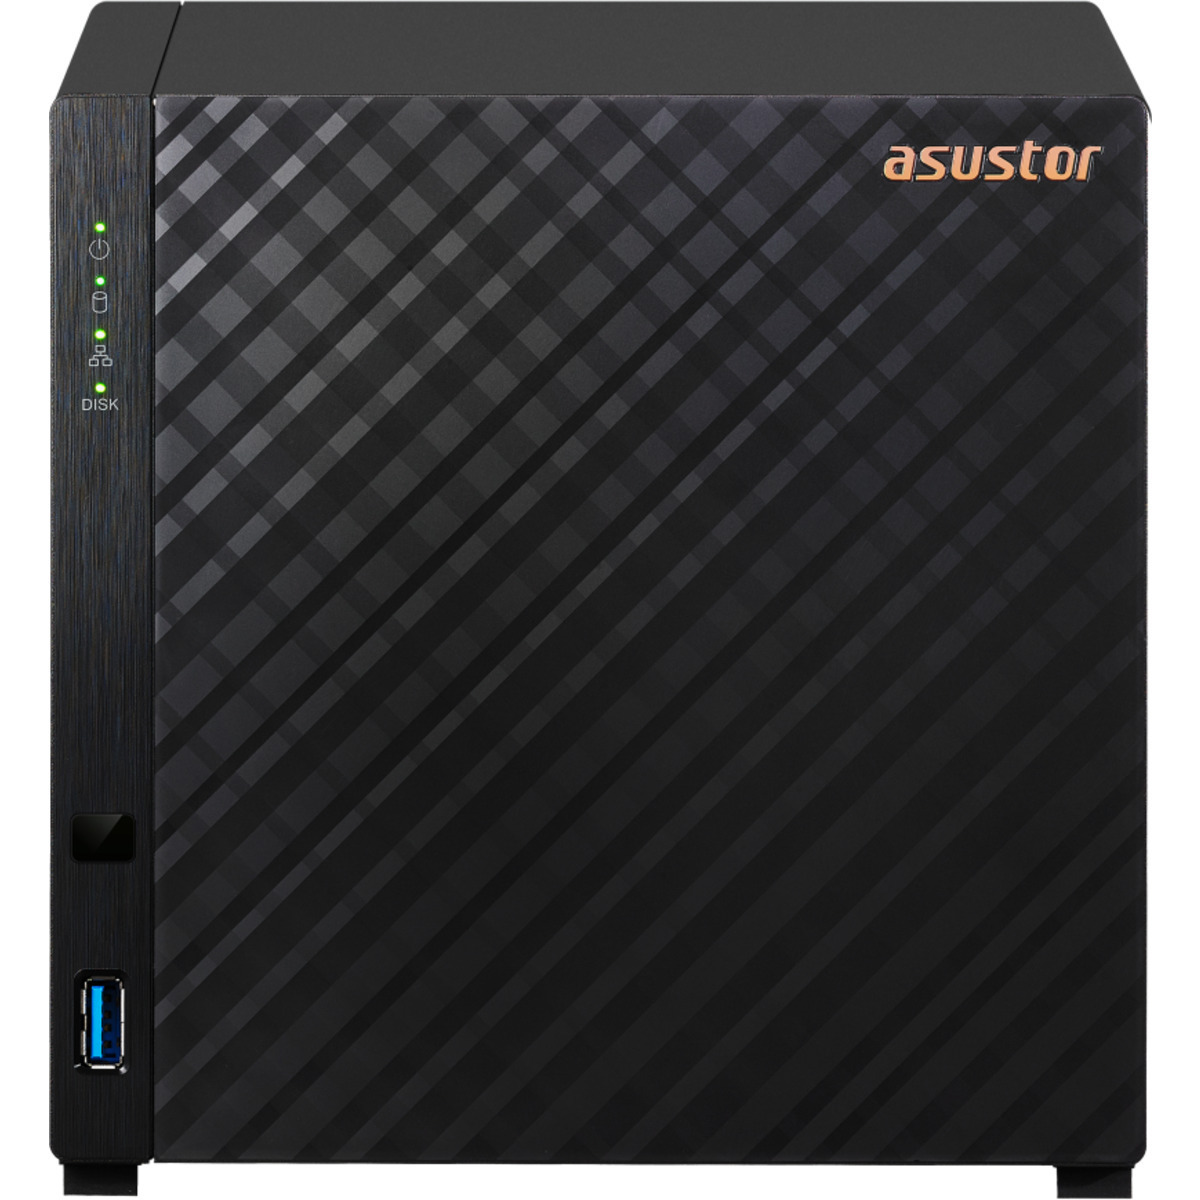 ASUSTOR DRIVESTOR 4 AS1104T 12tb 4-Bay Desktop Personal / Basic Home / Small Office NAS - Network Attached Storage Device 3x4tb Seagate BarraCuda ST4000DM004 3.5 7200rpm SATA 6Gb/s HDD CONSUMER Class Drives Installed - Burn-In Tested DRIVESTOR 4 AS1104T